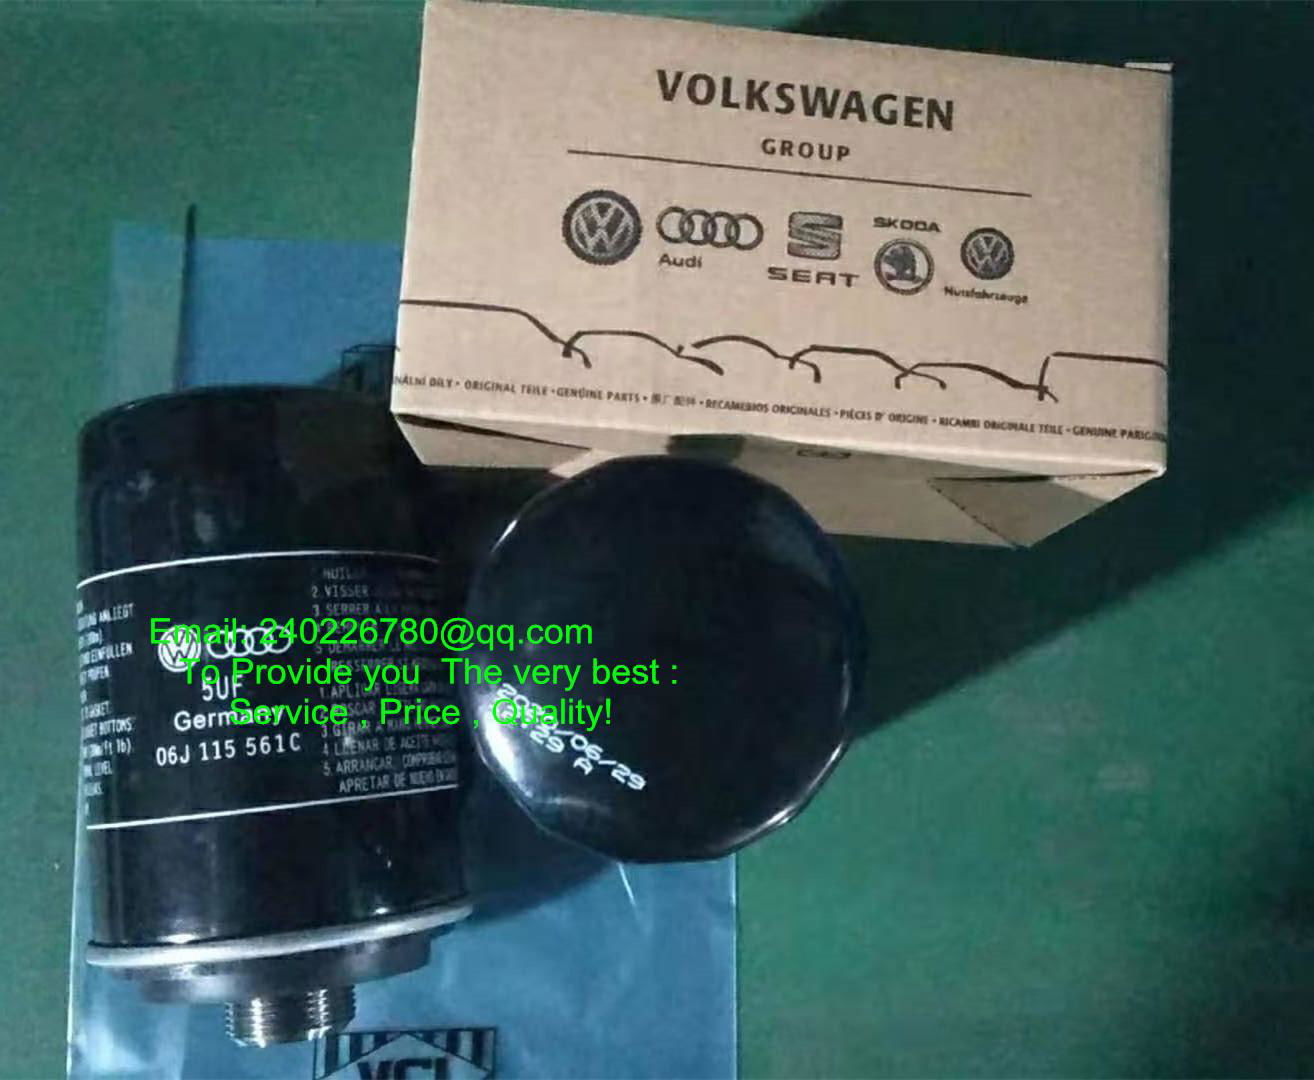 FOR VOLKSWAGEN Oil Filter 06J115561C and 06J115561B and 03C115562A 06J115403C   